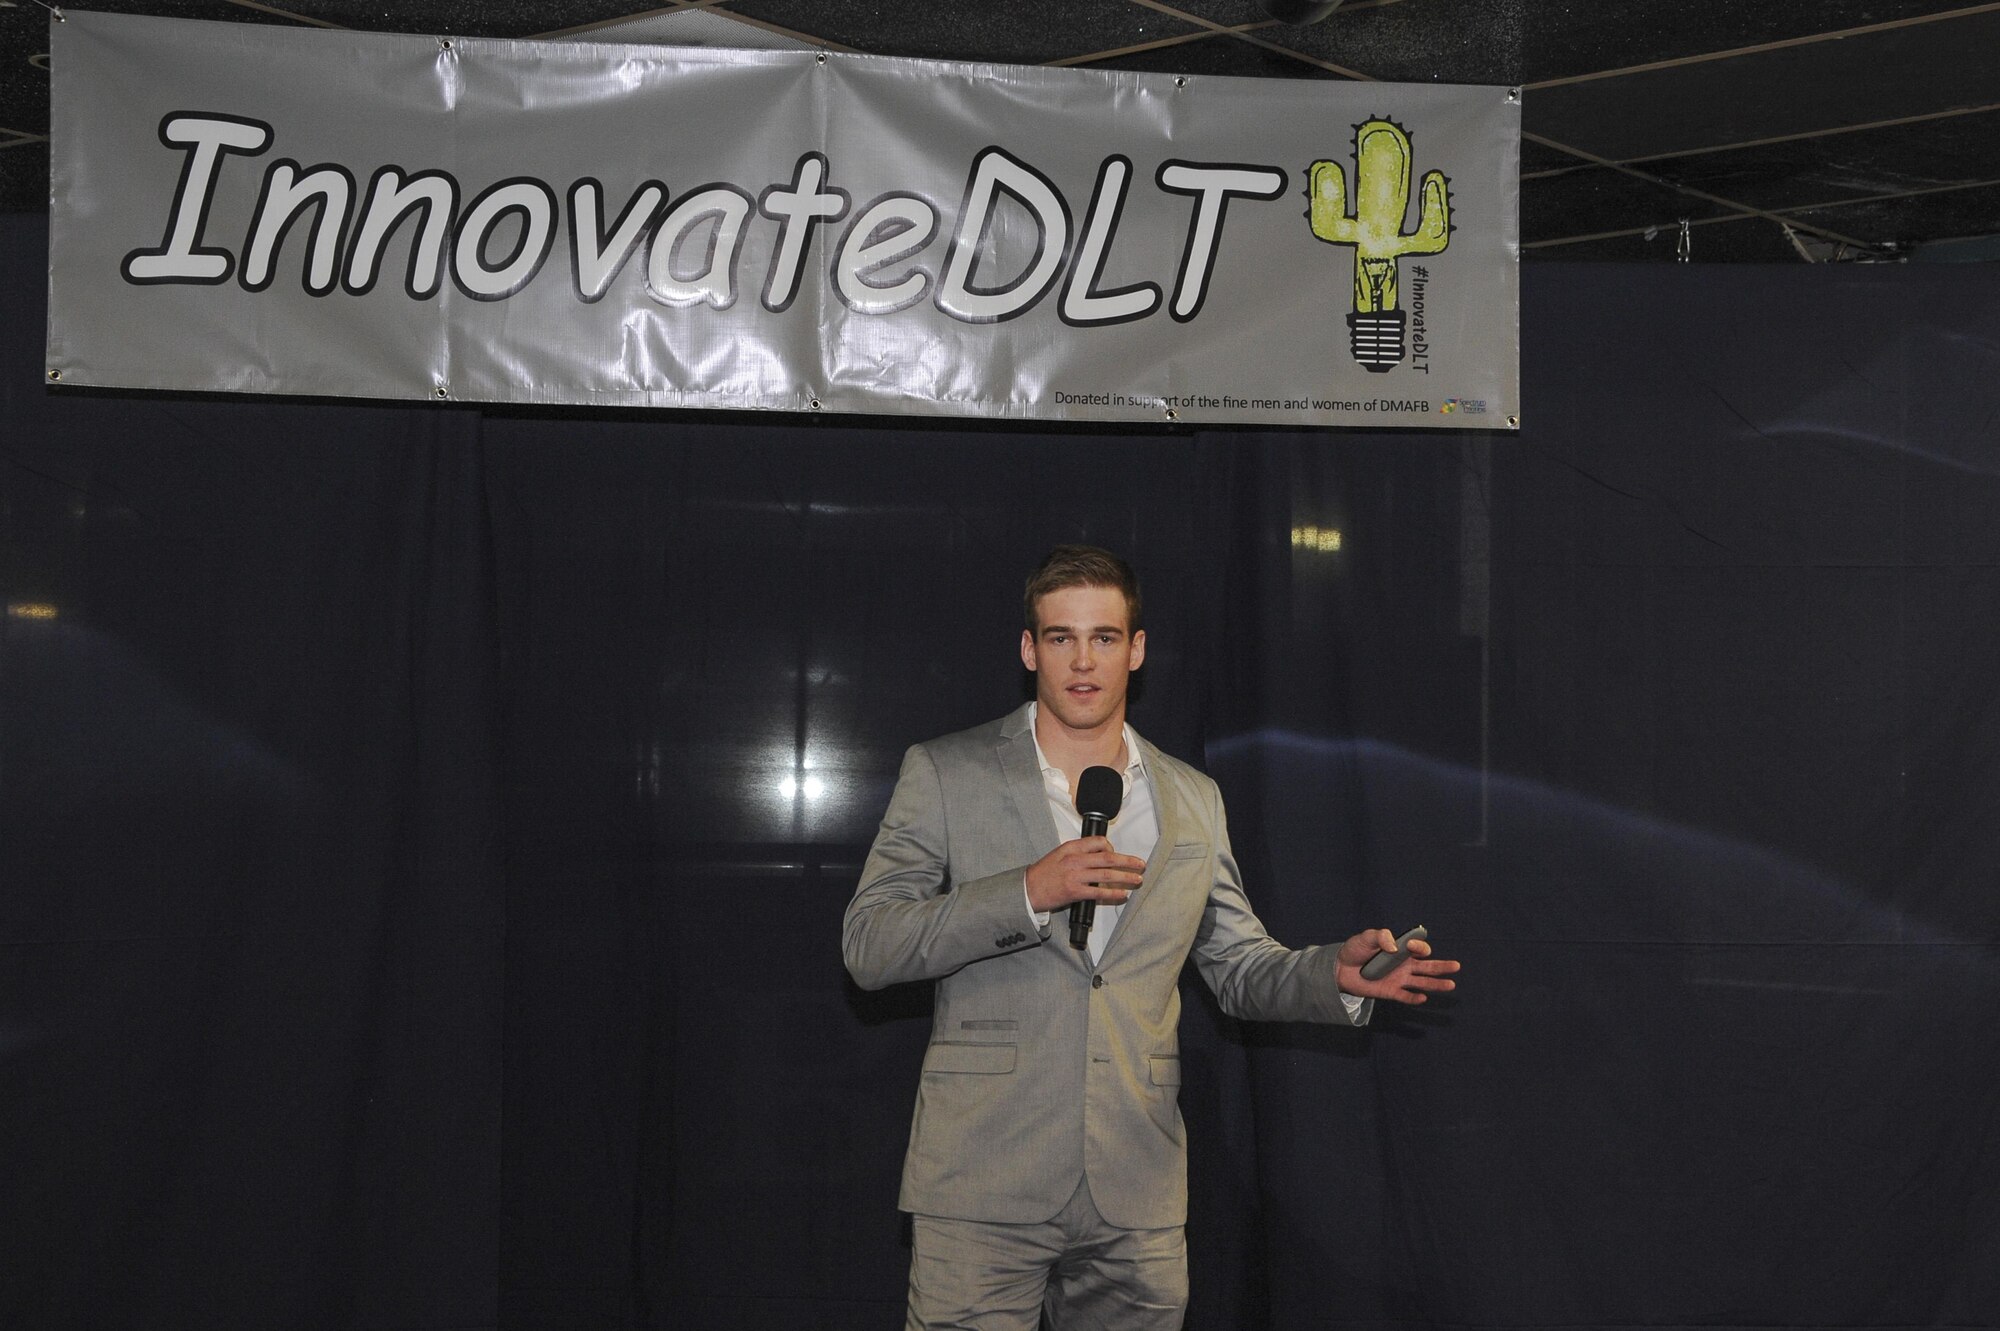 U.S. Air Force 2nd Lt. Benjamin Persian, 355th Contracting Squadron contract administrator, presents his proposal for adjustable standing desks in the workplace during the #InnovateDLT event held at Davis-Monthan Air Force Base, Ariz., Jan. 29, 2016. The event gave Airmen an opportunity to pitch their innovative ideas to the base commander and a panel of judges. (U.S. Air Force photo by Airman 1st Class Ashley N. Steffen/Released)